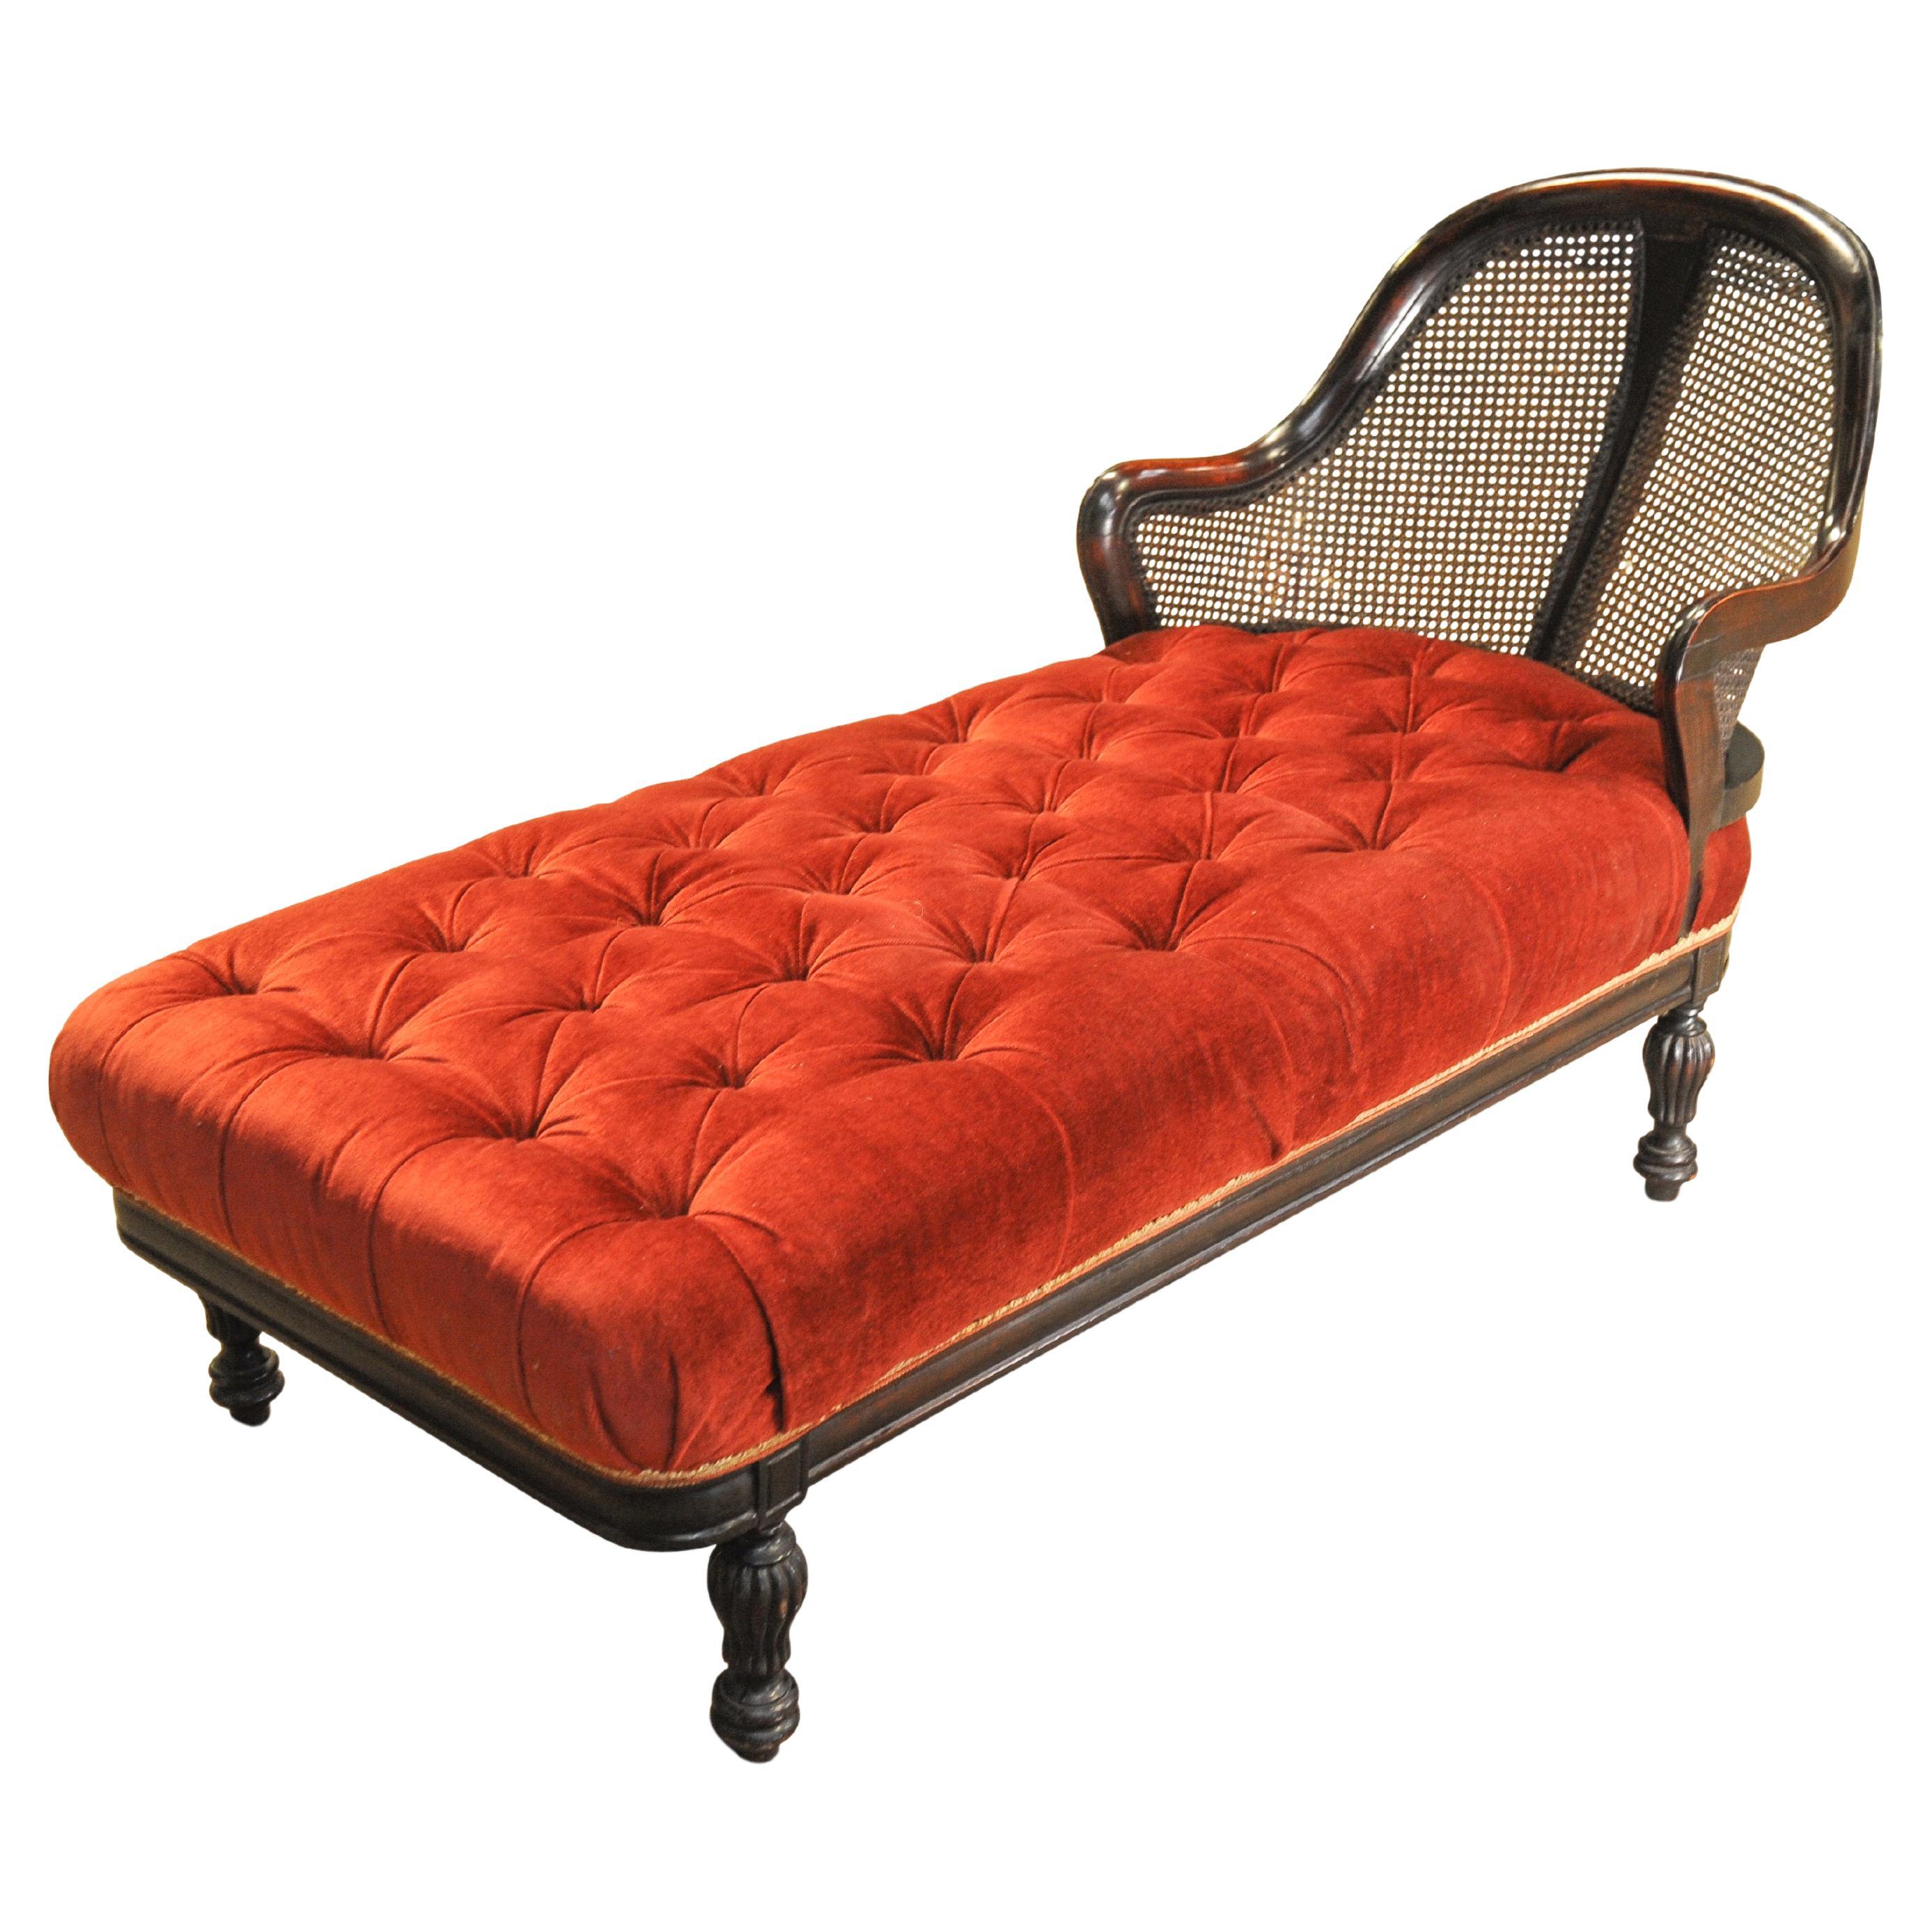 Rare Victorien Velours Rouge Chesterfield Bergere Chaise Longue / Day Bed 